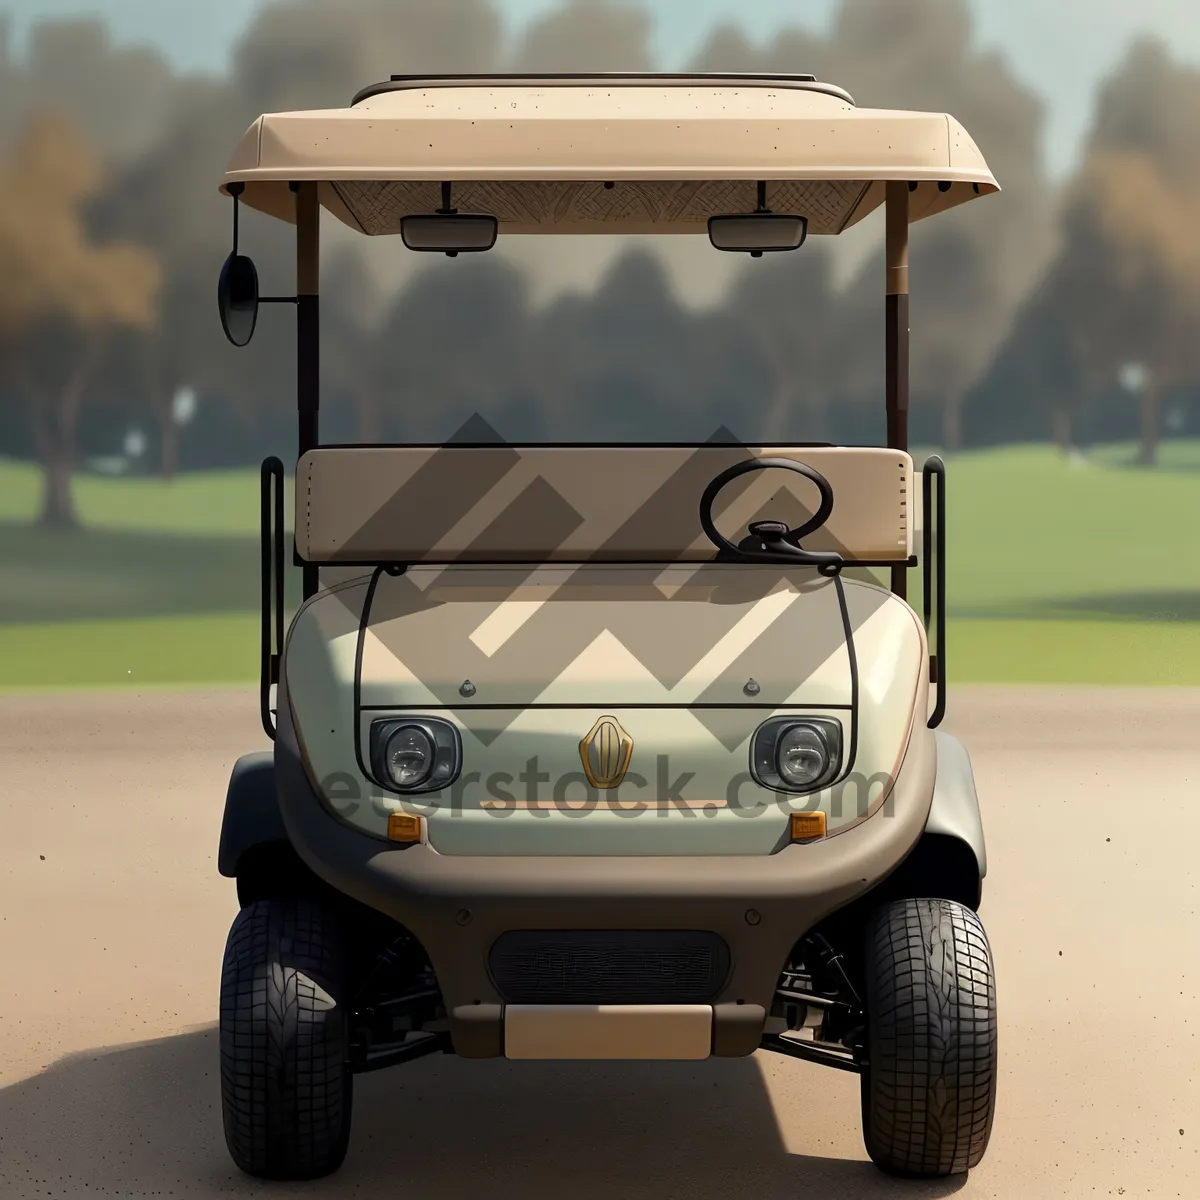 Picture of Sporty Golf Cart Driving on Green Grass